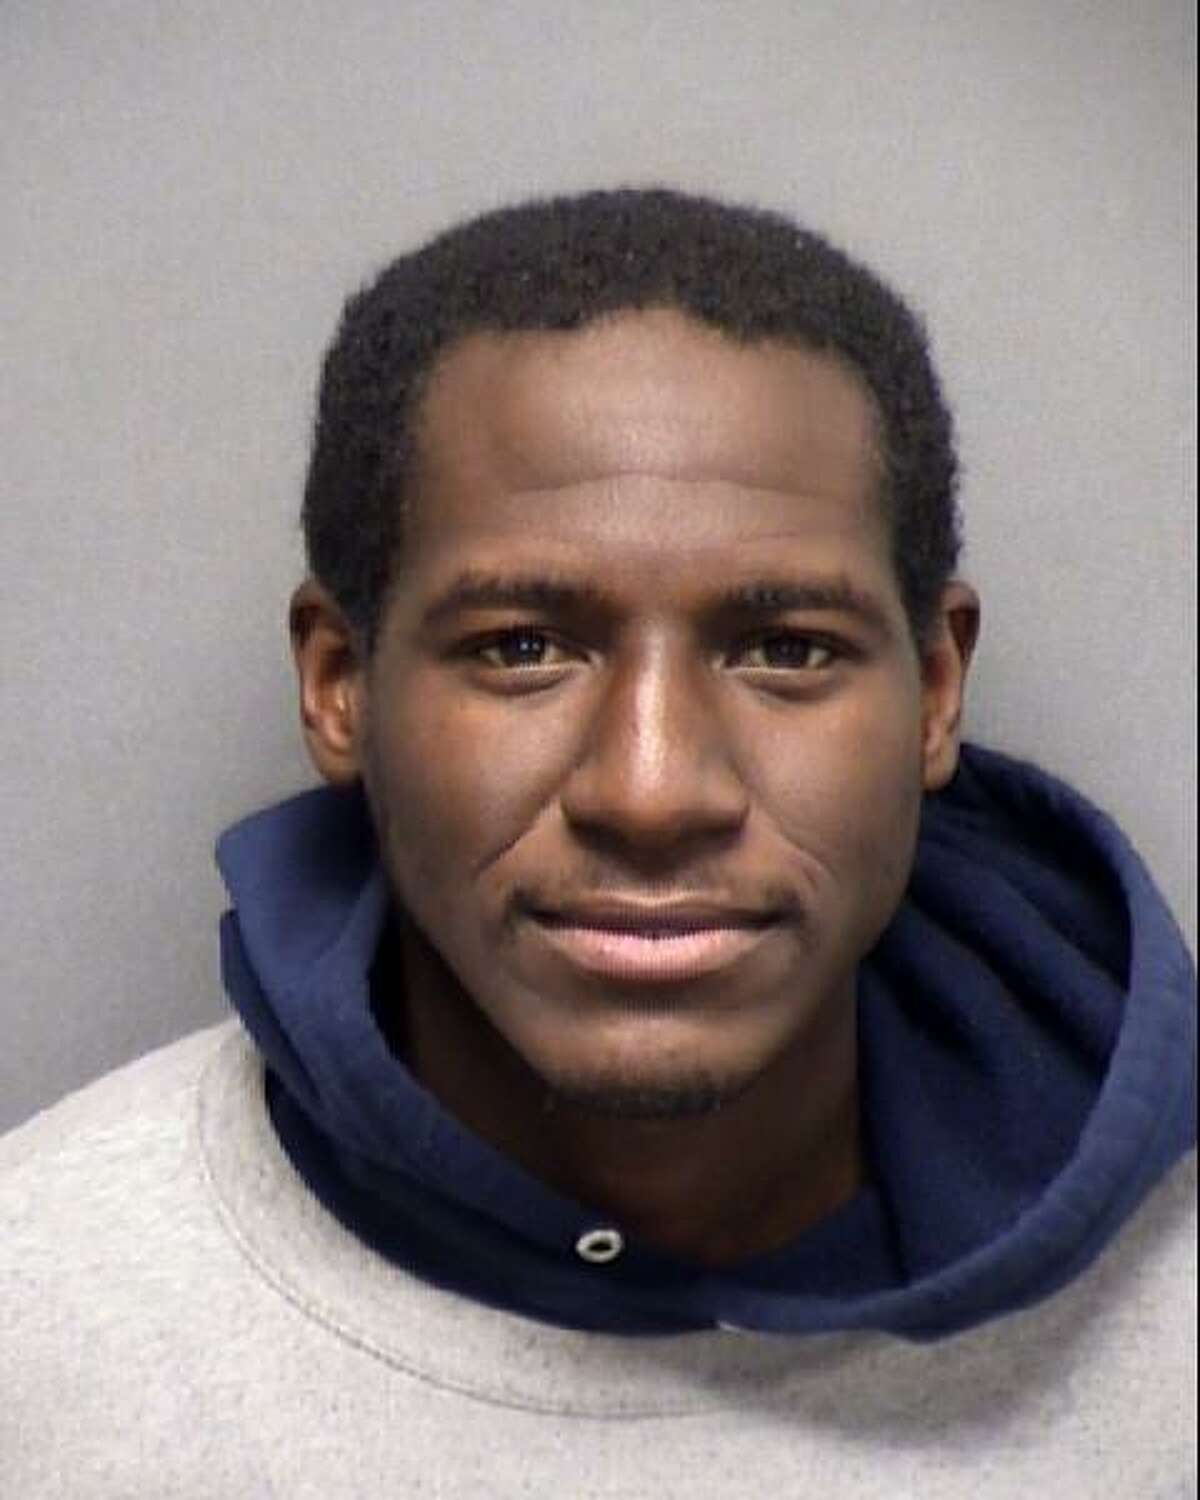 Demarco Culpepper, 25, has been charged with two counts of aggravated sexual assault and one count of robbery.